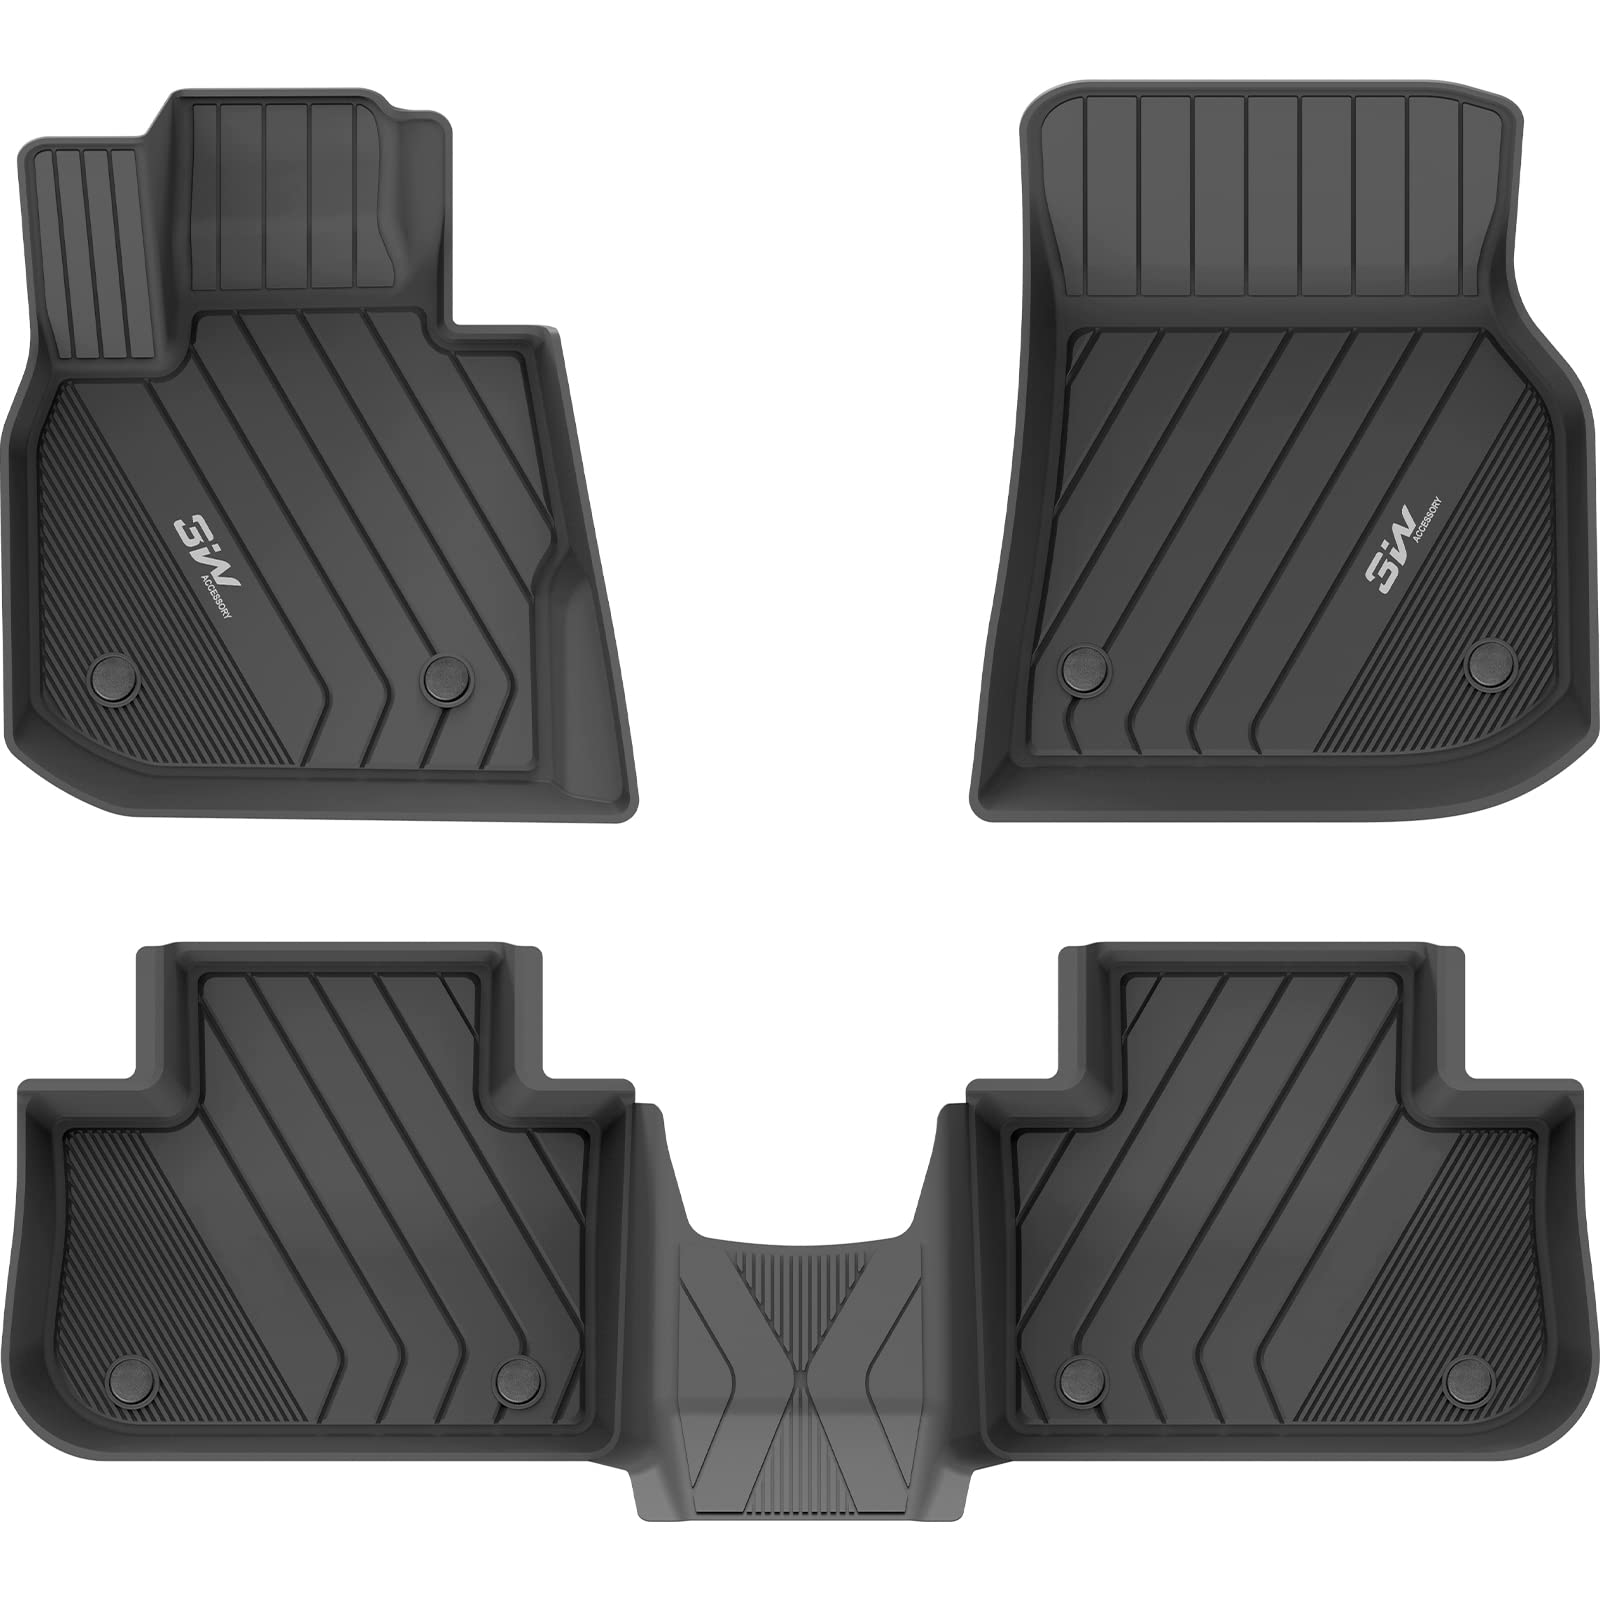 3W BMW 2019-2024 X4 M M40i xDrive30i Floor Mats TPE Material & All-Weather Protection Vehicles & Parts 3W 2019-2024 X4 2019-2024 1st&2nd Row Mats